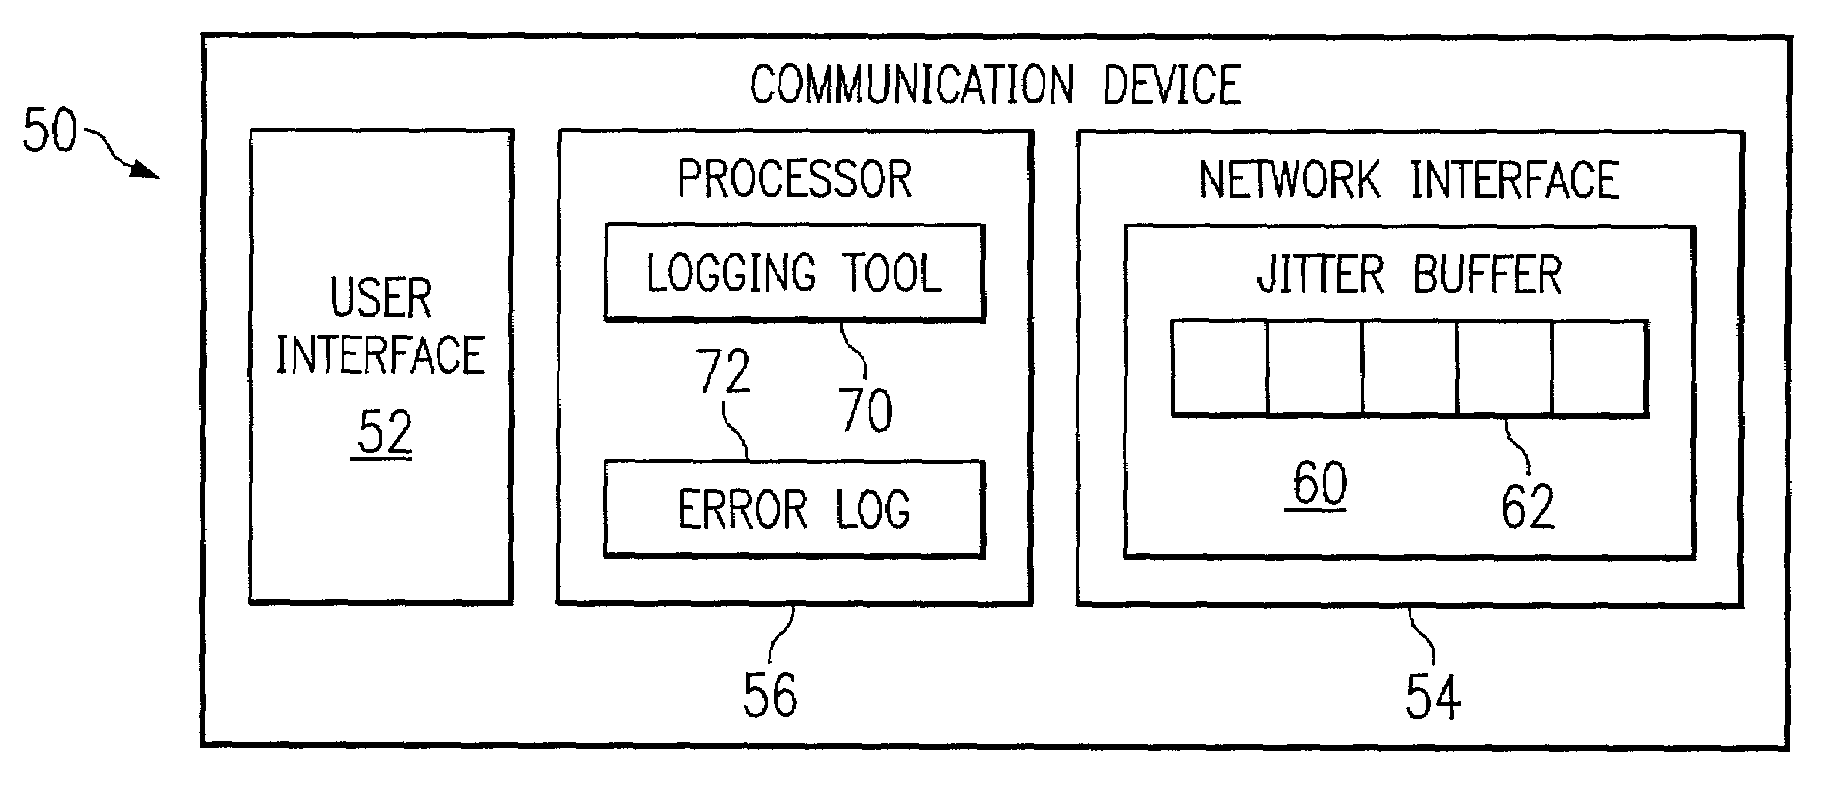 Method and system for logging voice quality issues for communication connections